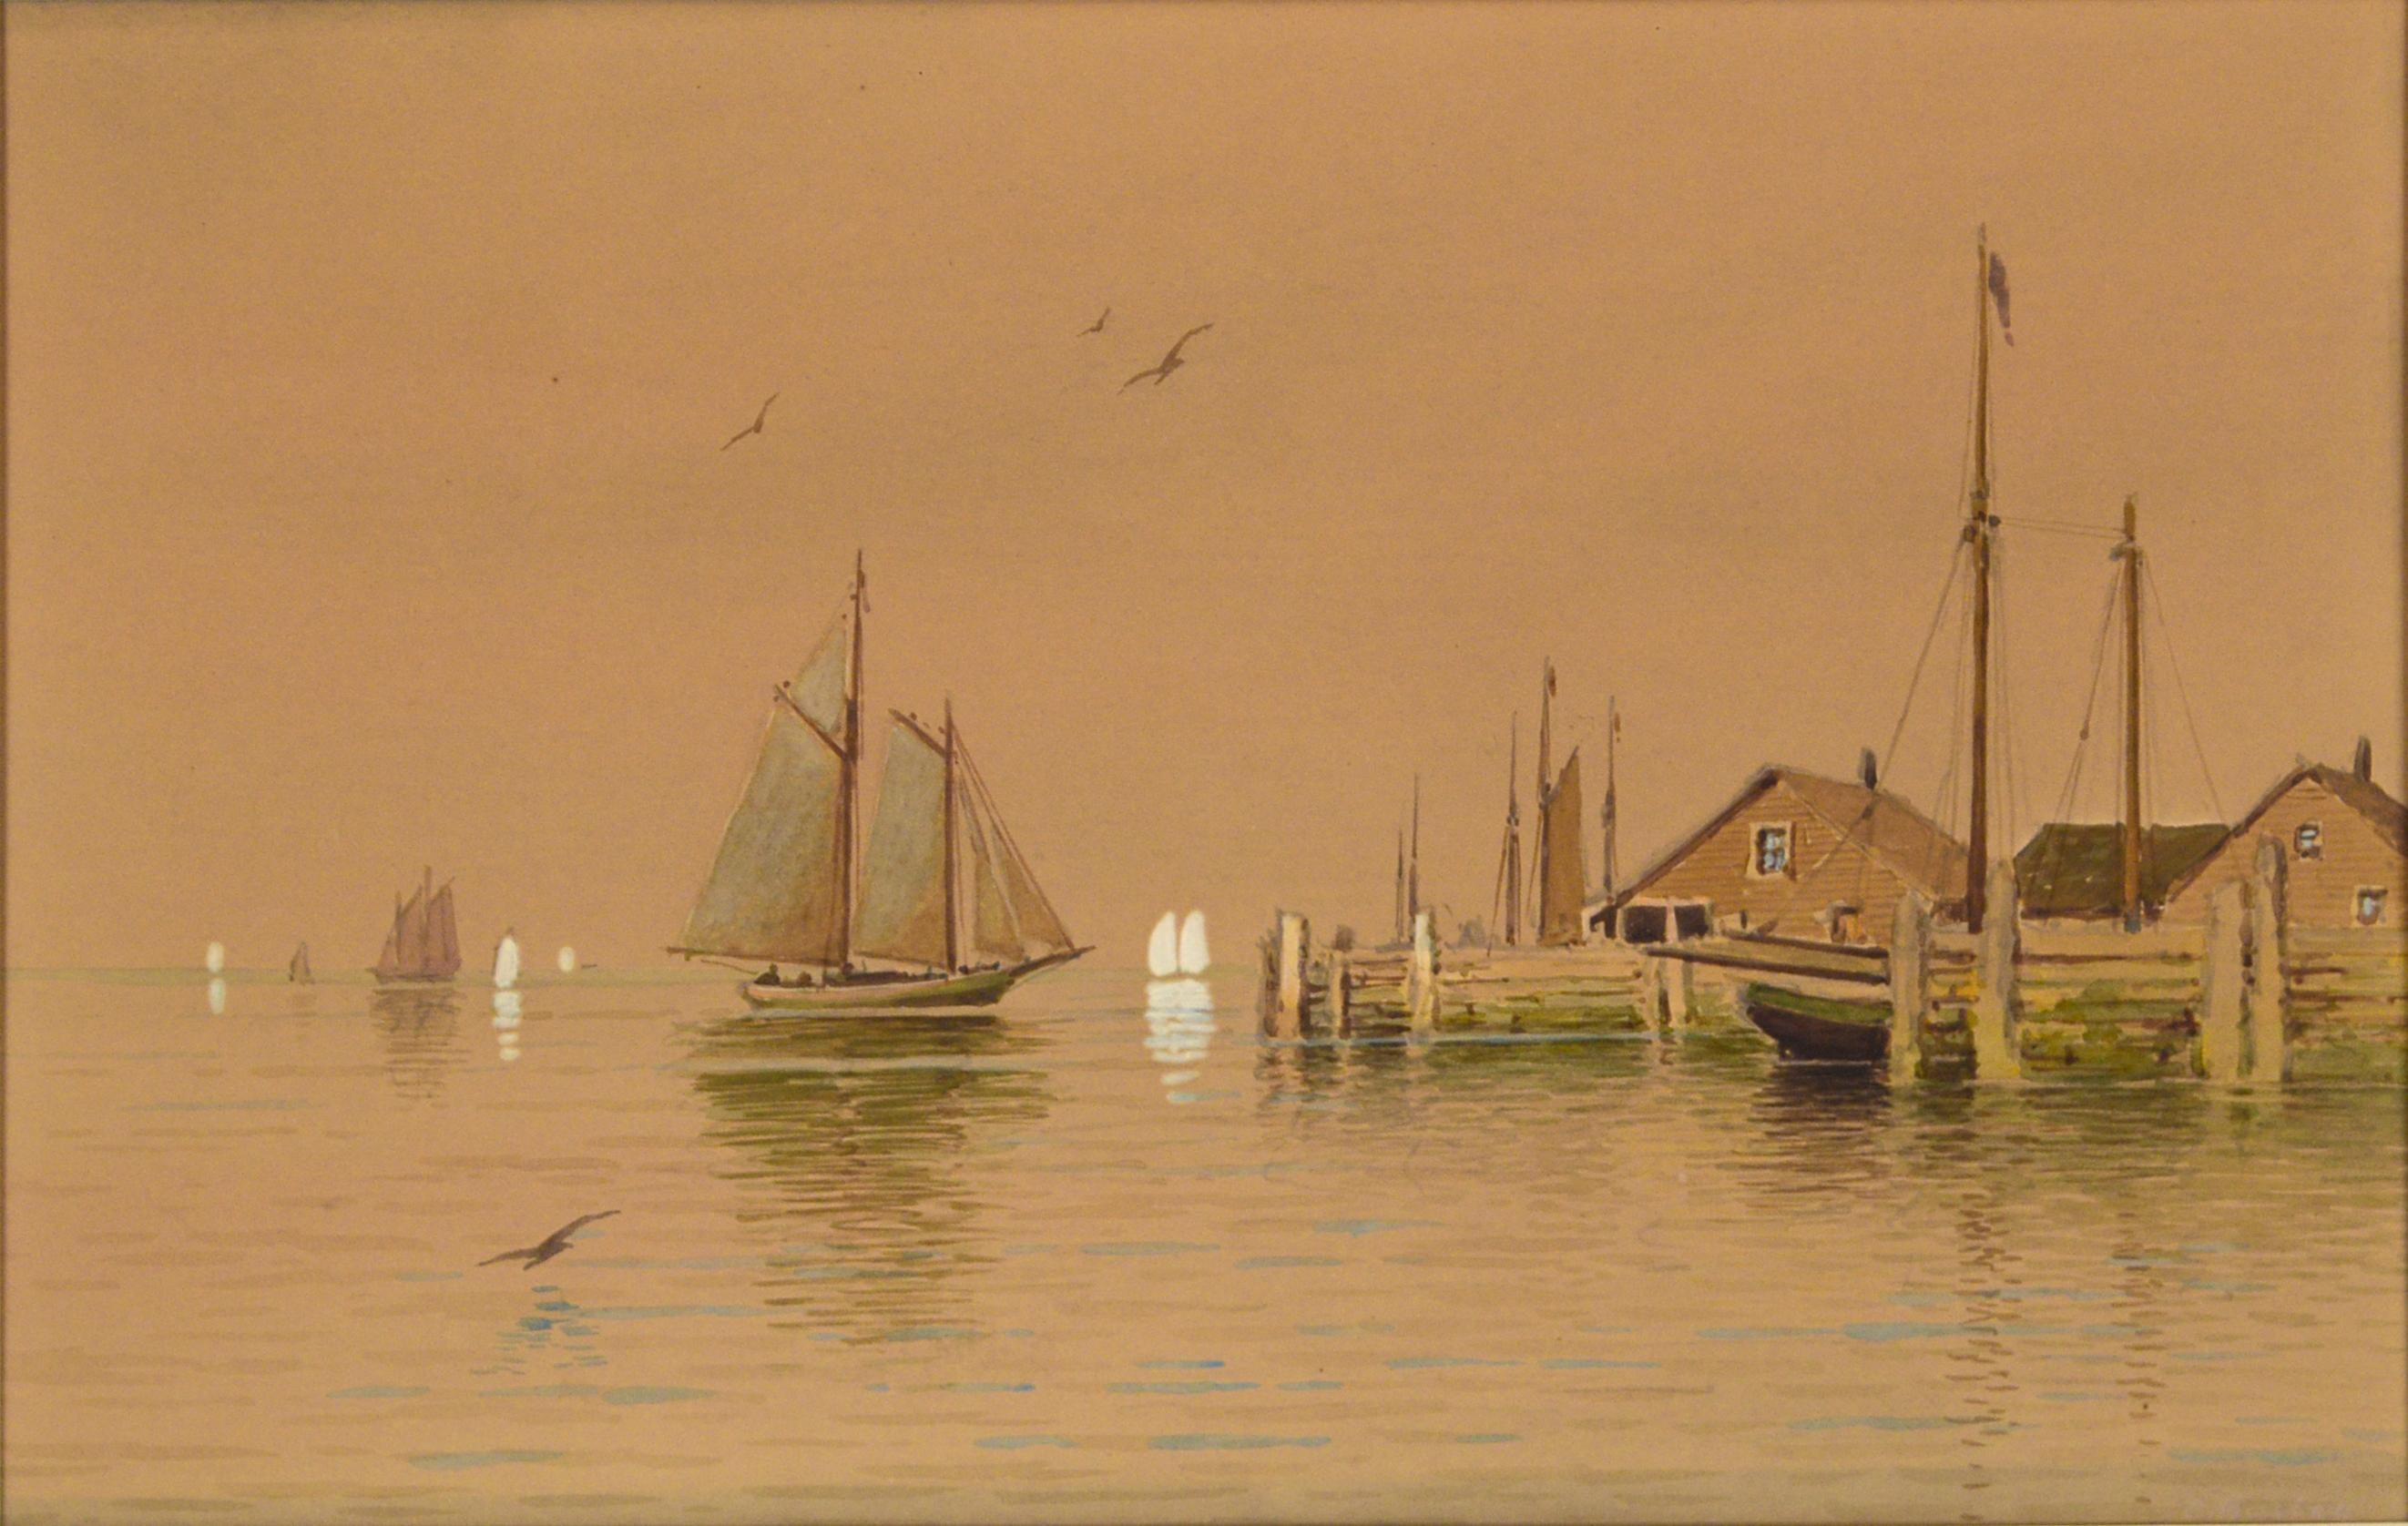 Gloucester Harbor Docking the Boat 1900 Two Masted Schooner - Art by C Bailey